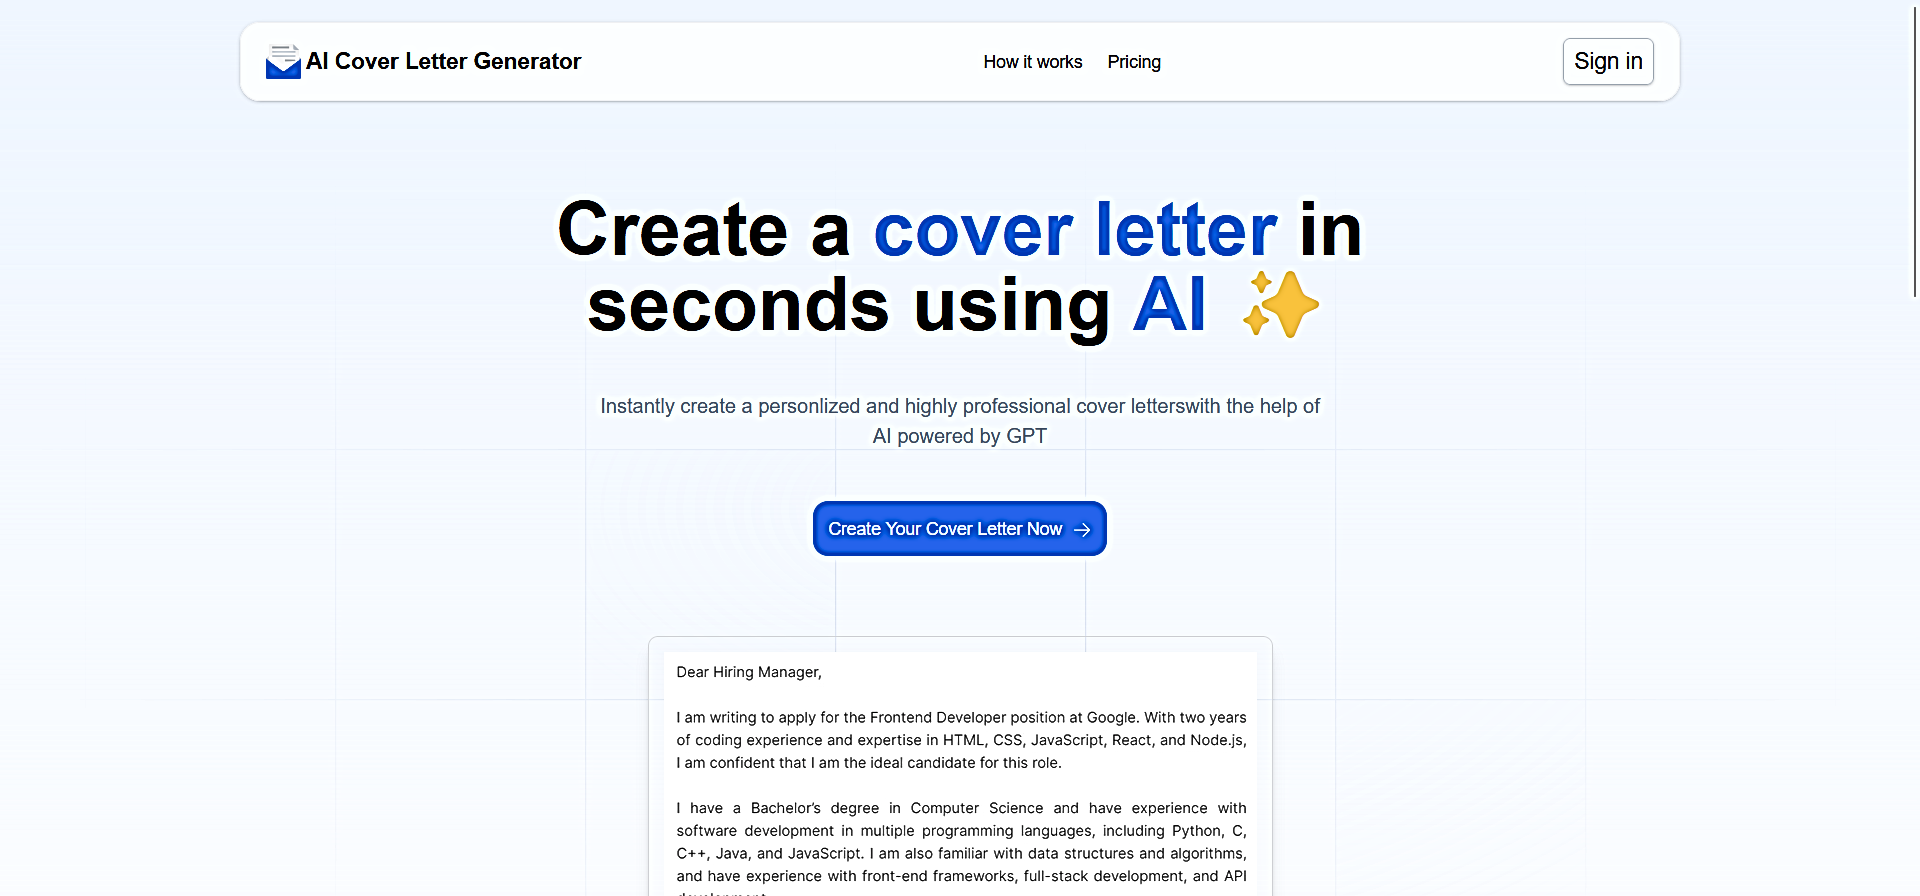 AI Cover Letter Generator featured